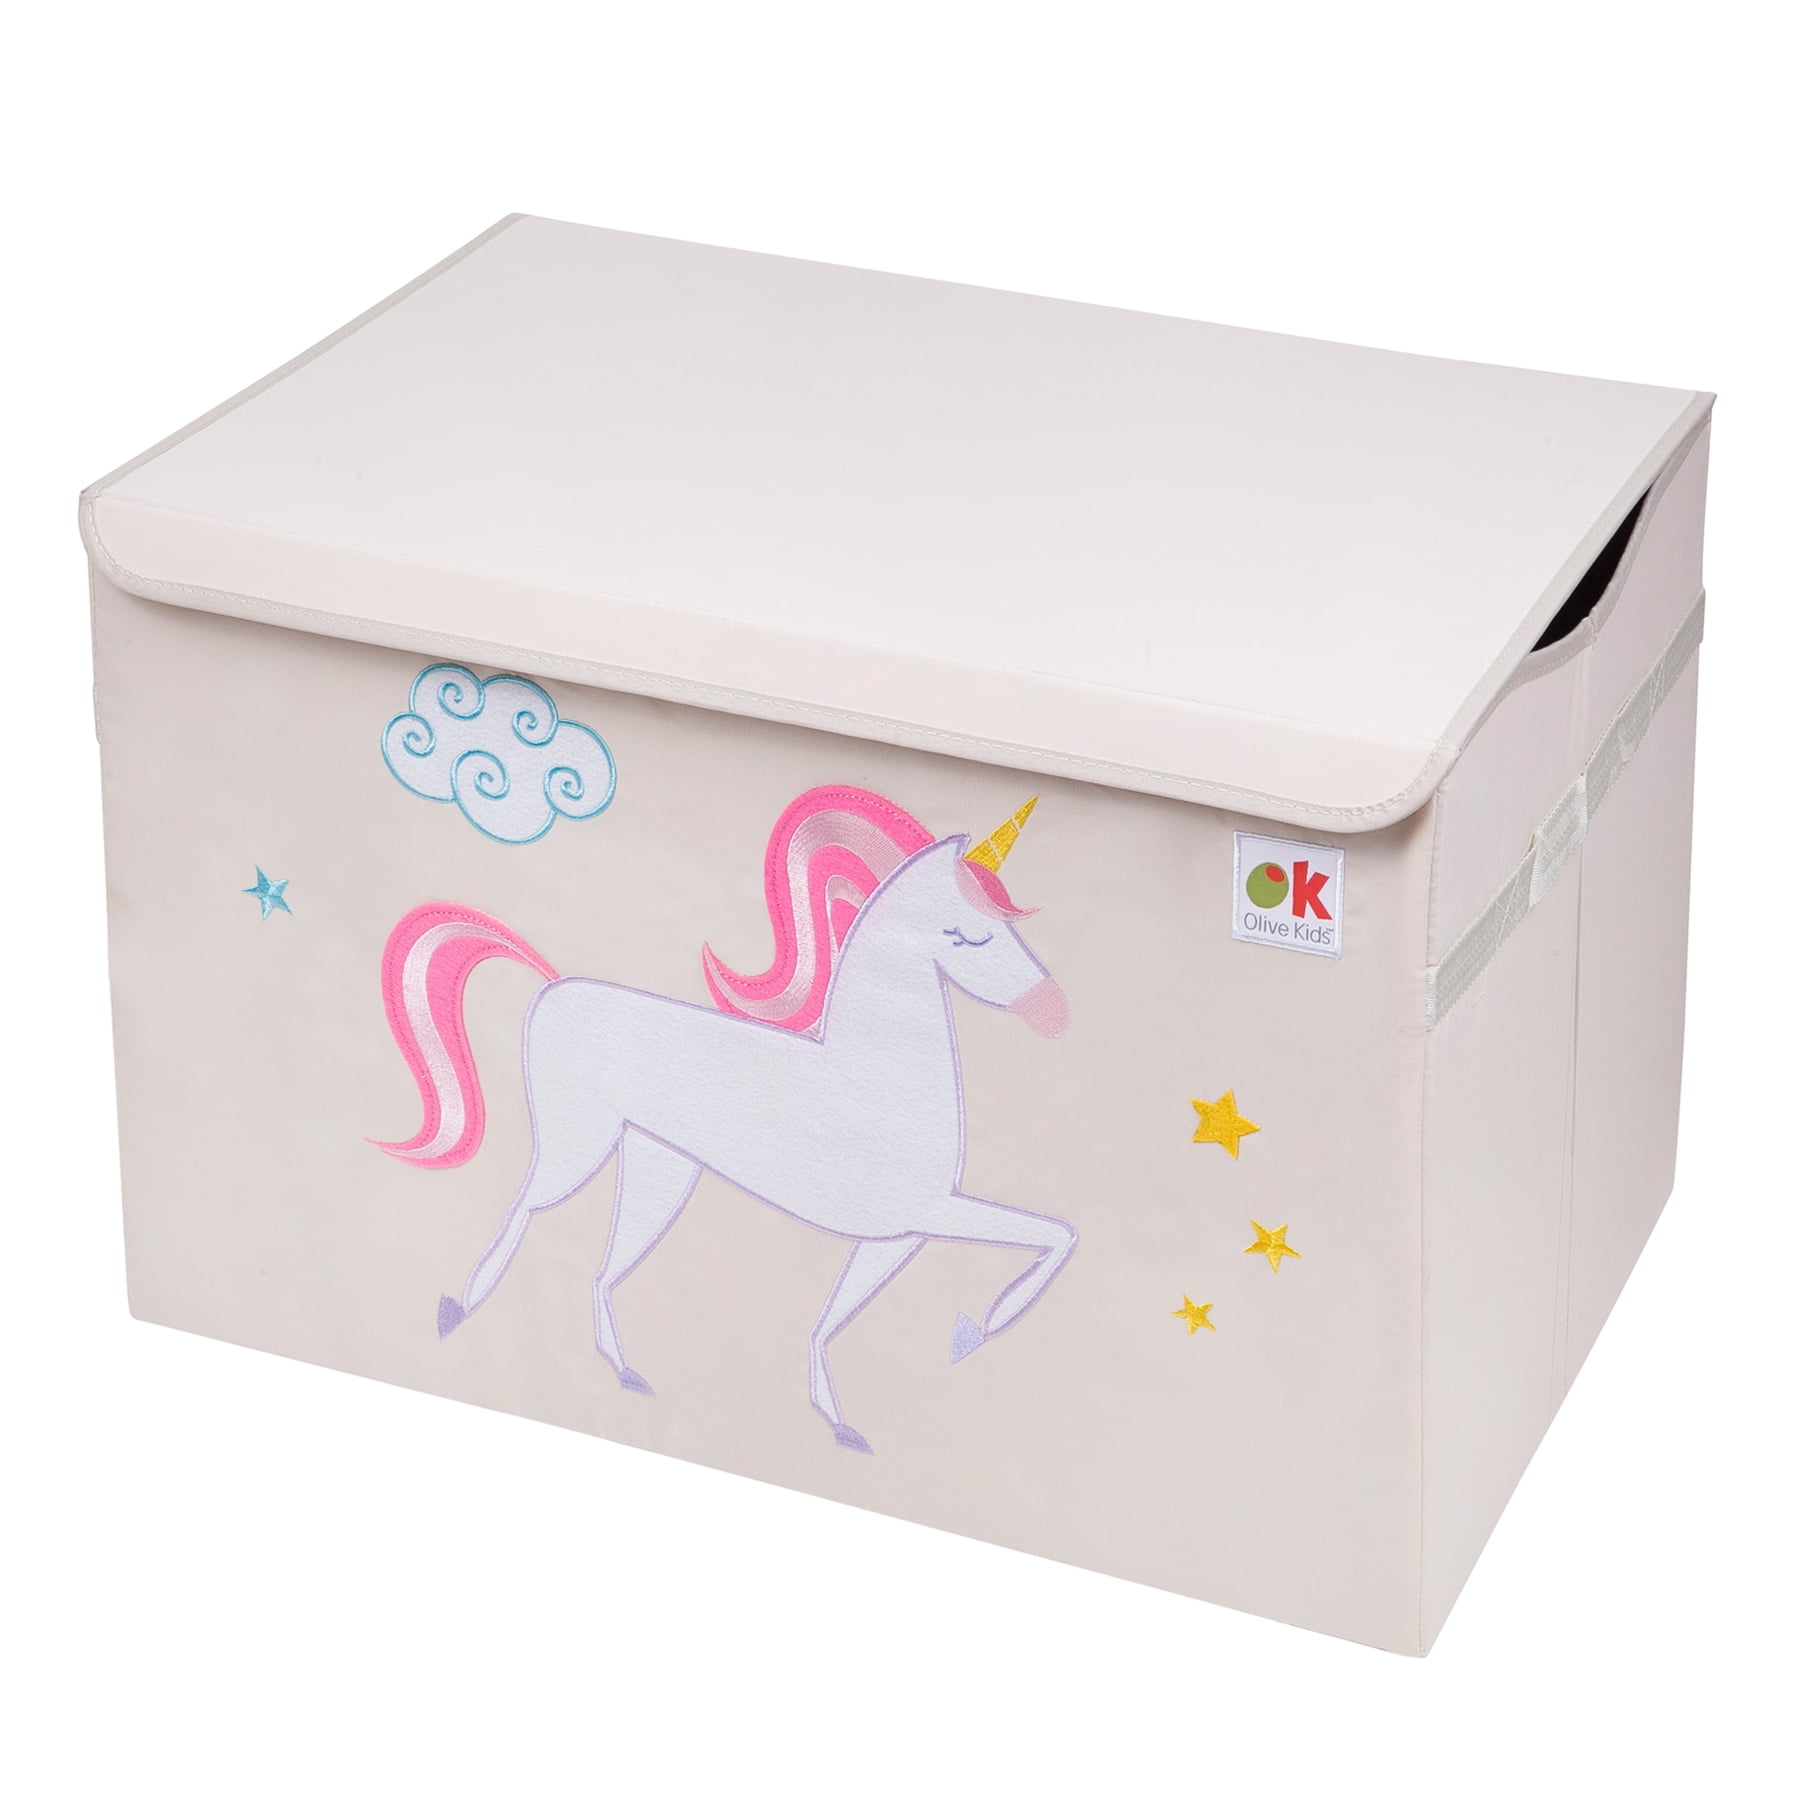 Country Club Pop Up Storage Boxes Pink Multi Stars Pattern Toy Box Organiser 